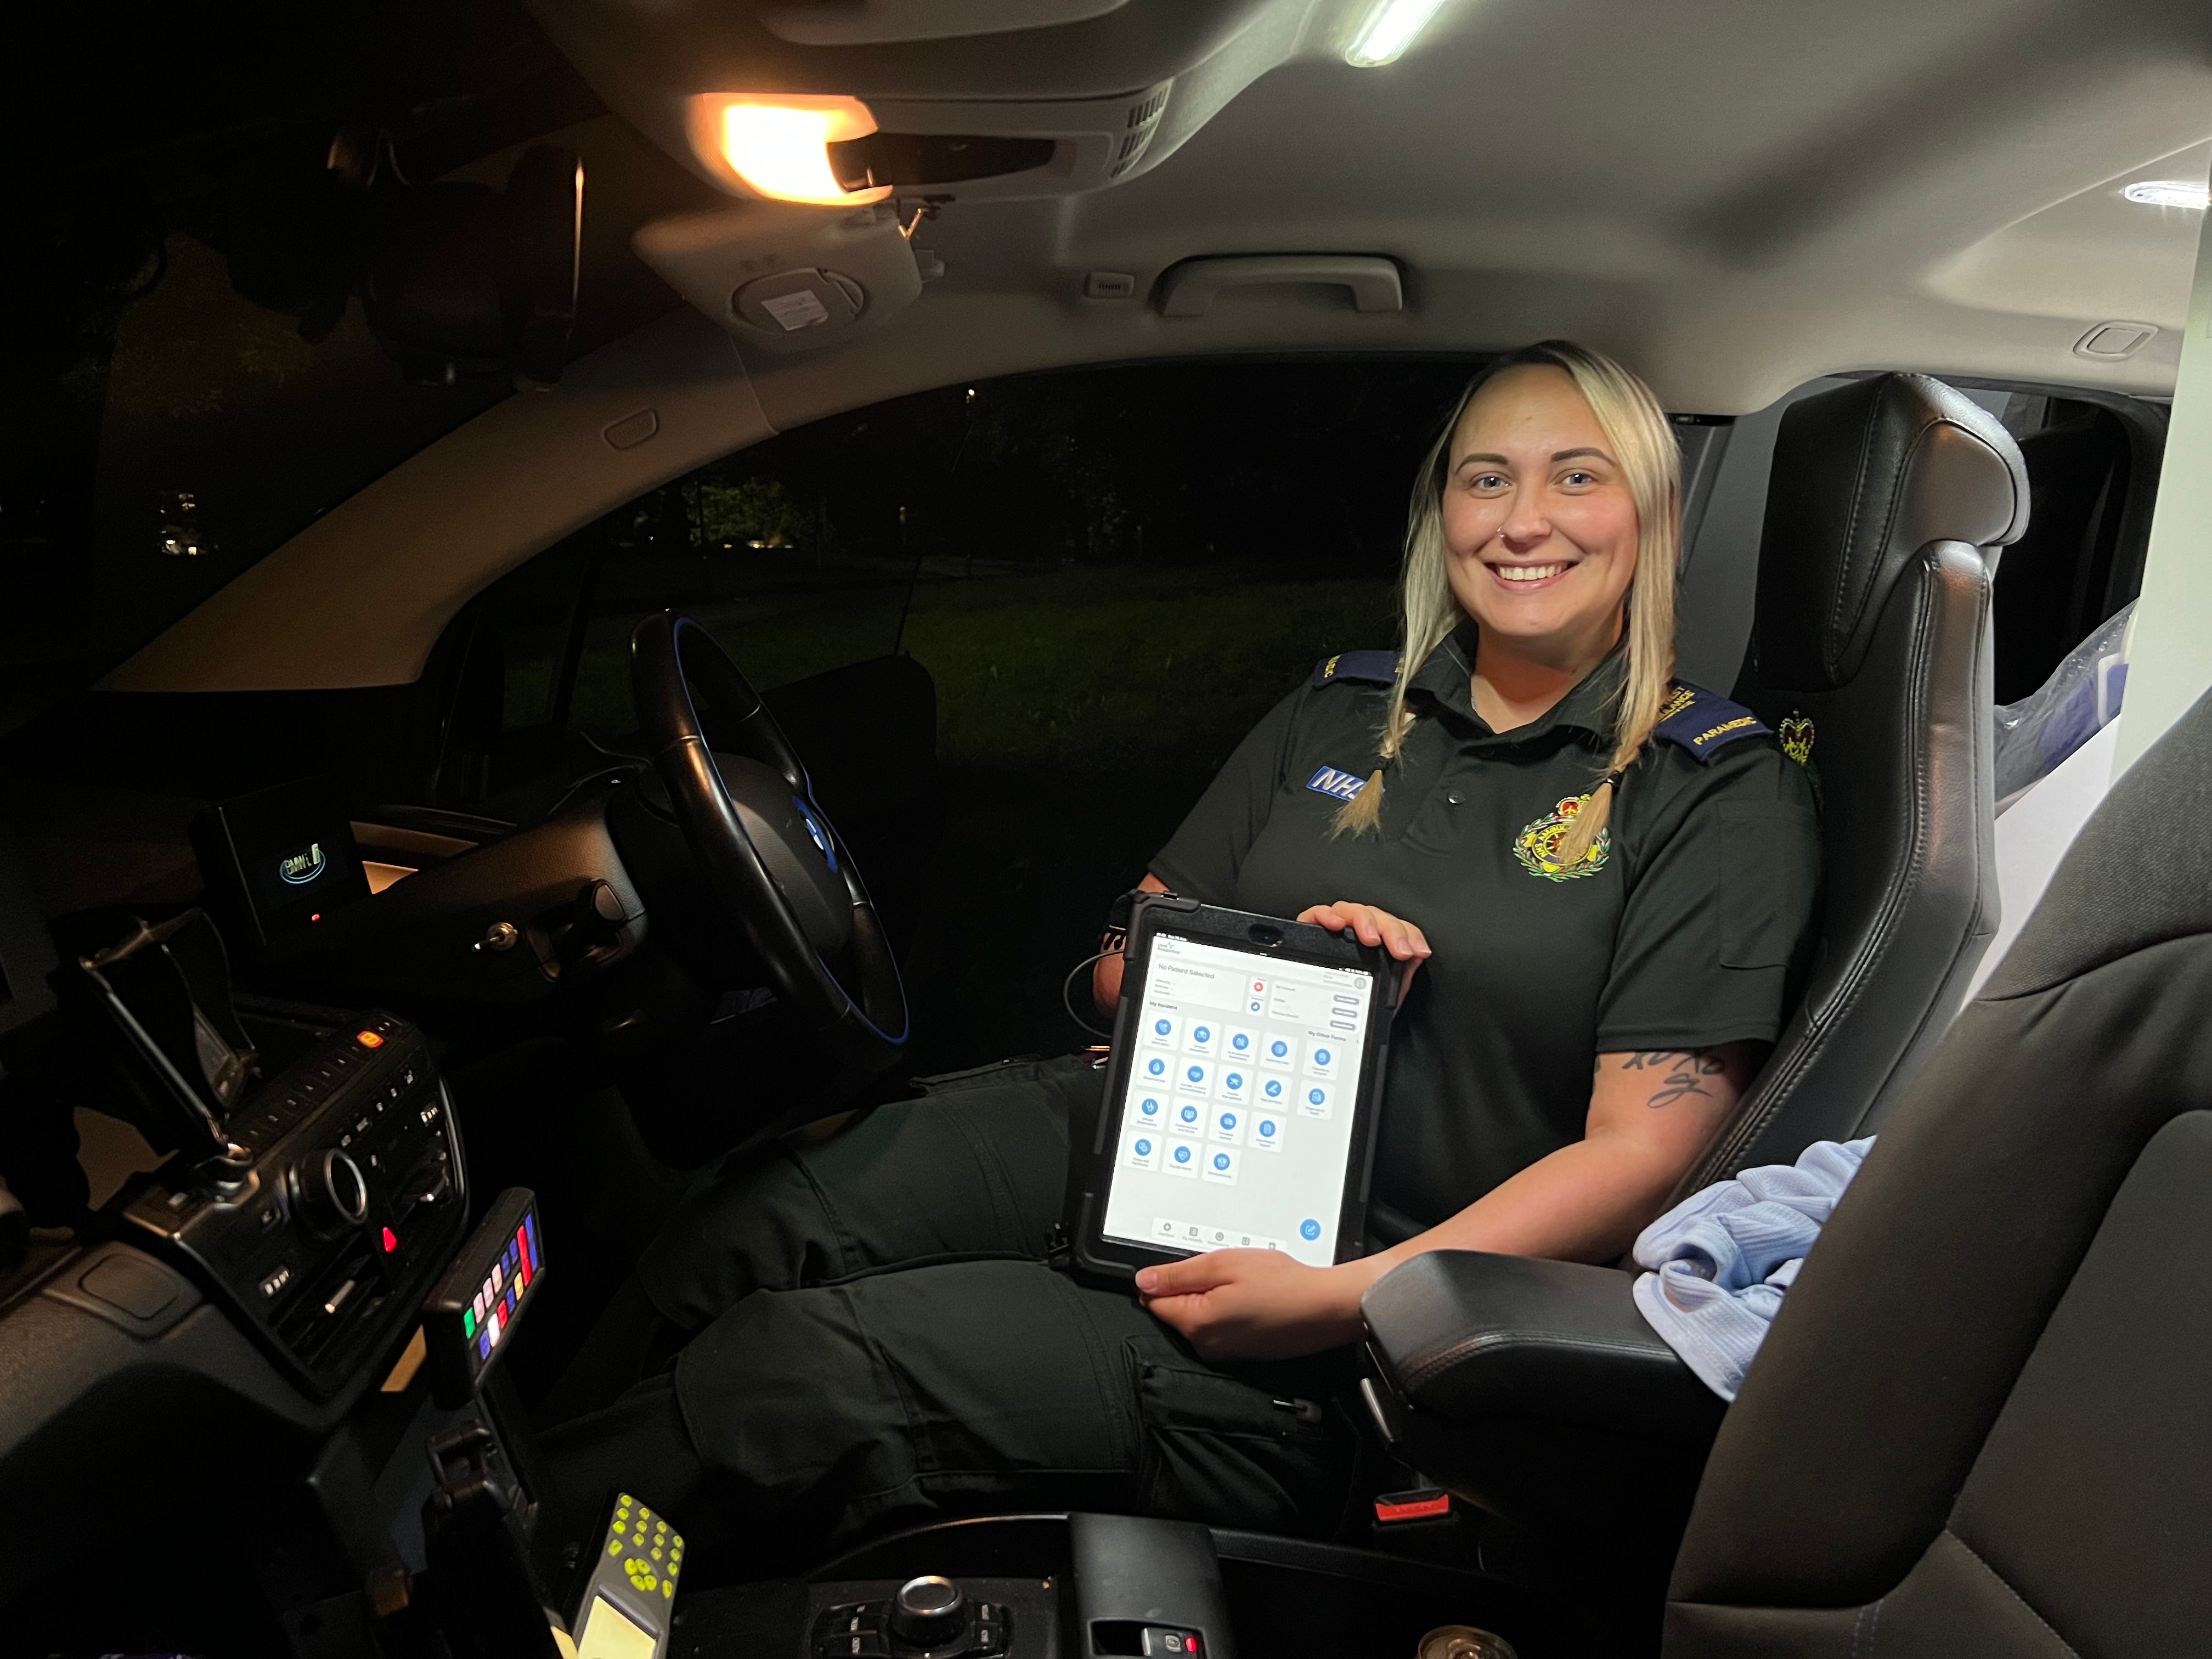 Award-winning mobile EPR for ambulances delivering efficient and personalised care on the frontline